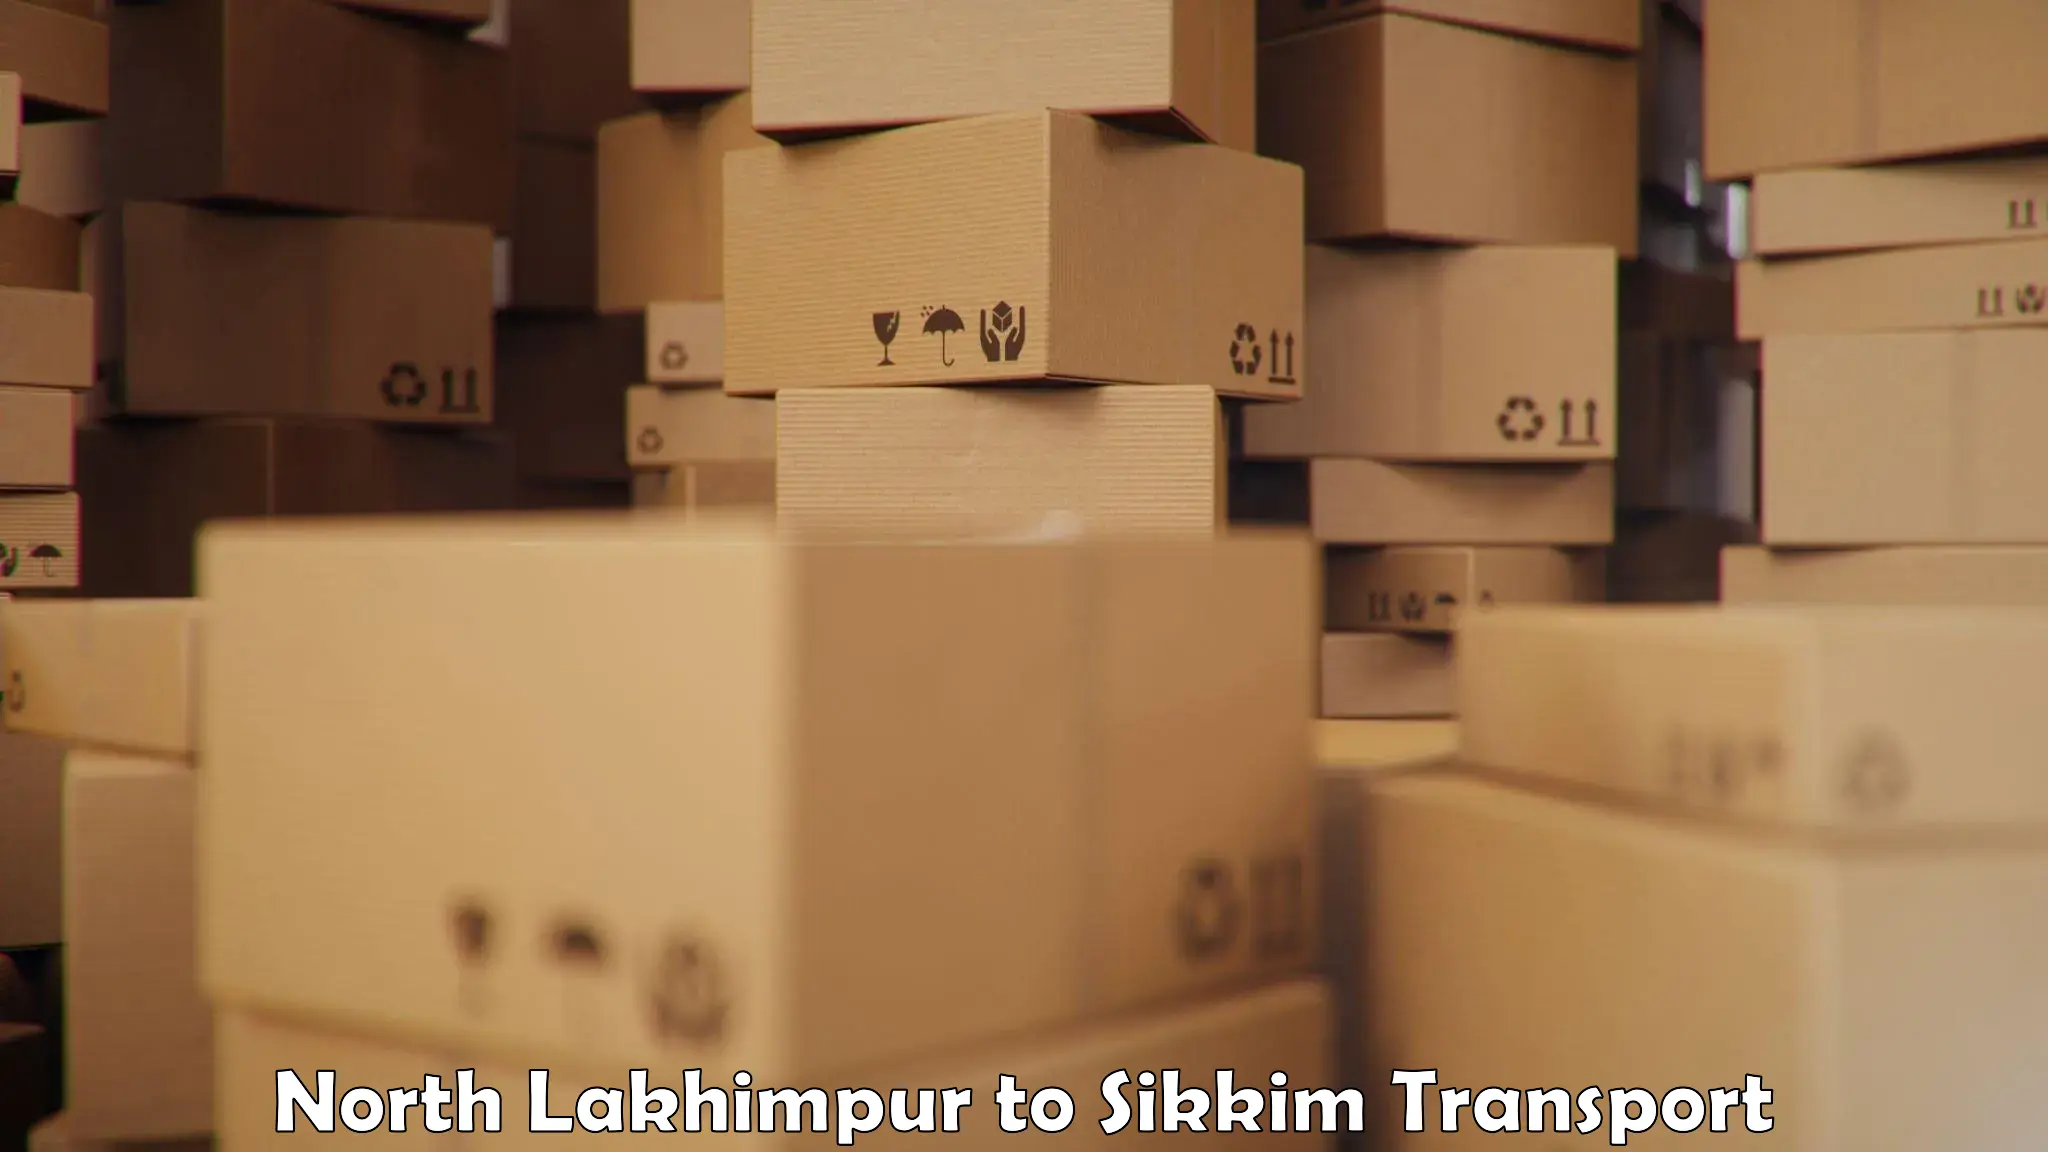 Goods delivery service North Lakhimpur to Sikkim